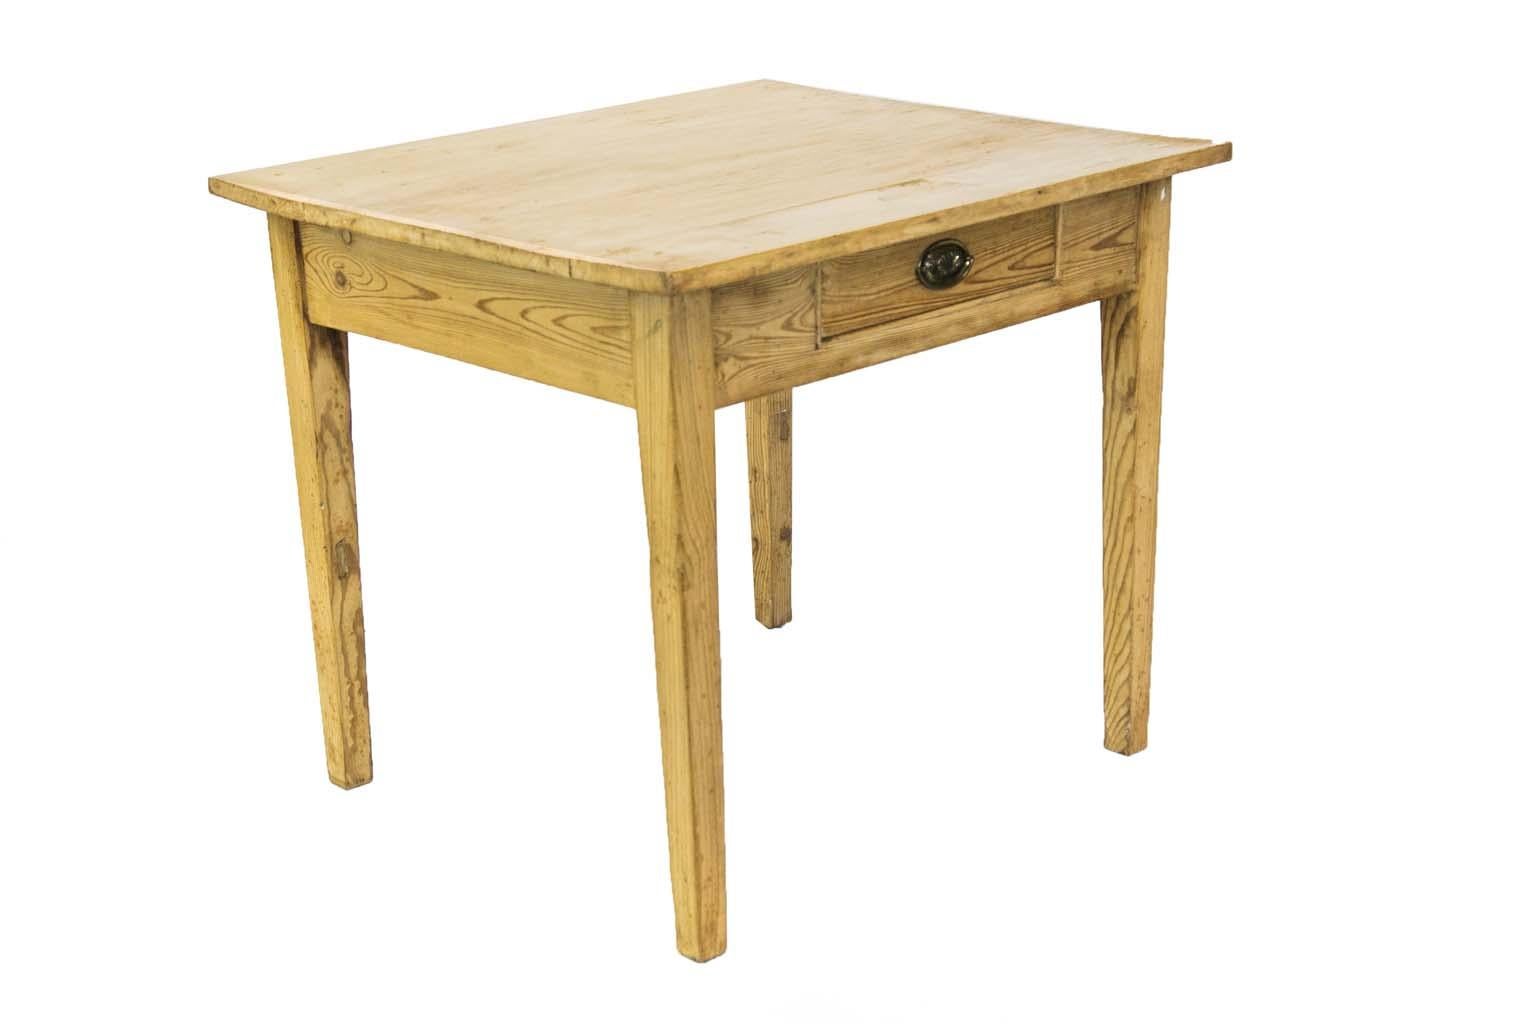 English birch and pine one drawer side table, the base is pine and top is birch. The drawer is surrounded by bullnose molding. It has a deep four board top.
 